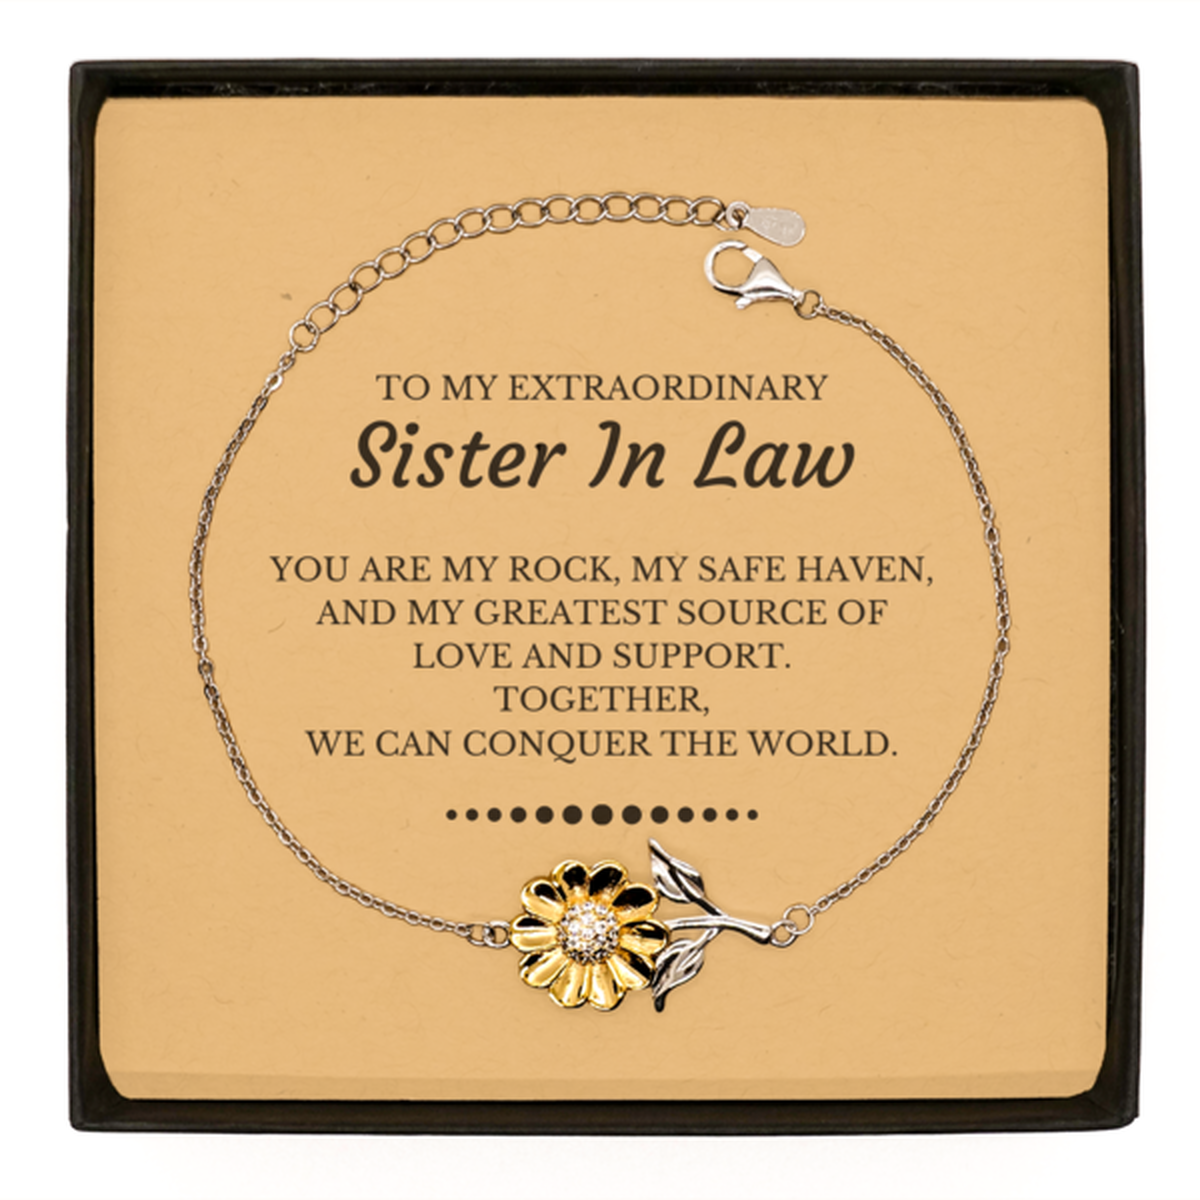 To My Extraordinary Sister In Law Gifts, Together, we can conquer the world, Birthday Sunflower Bracelet For Sister In Law, Christmas Gifts For Sister In Law